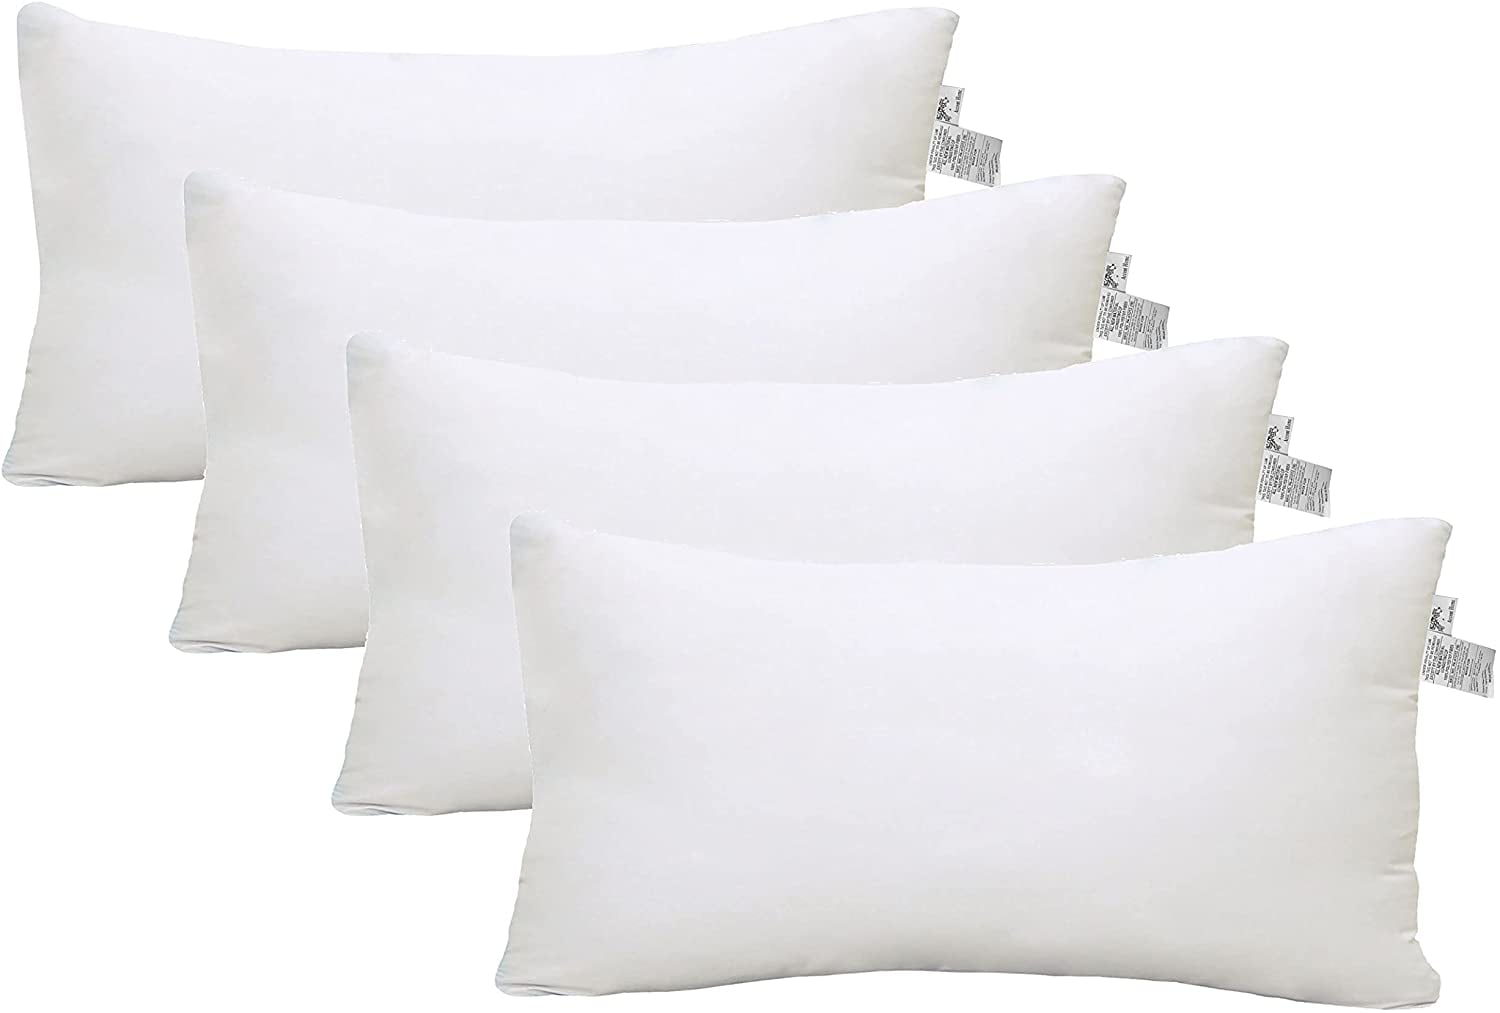  QSWRD 18 x 18 Pillow Inserts Set of 1 Outdoor Pillow Inserts  Waterproof Square Premium Throw Pillow Inserts Decorative Couch Pillow  Inserts White Sofa Pillows Indoor : Home & Kitchen